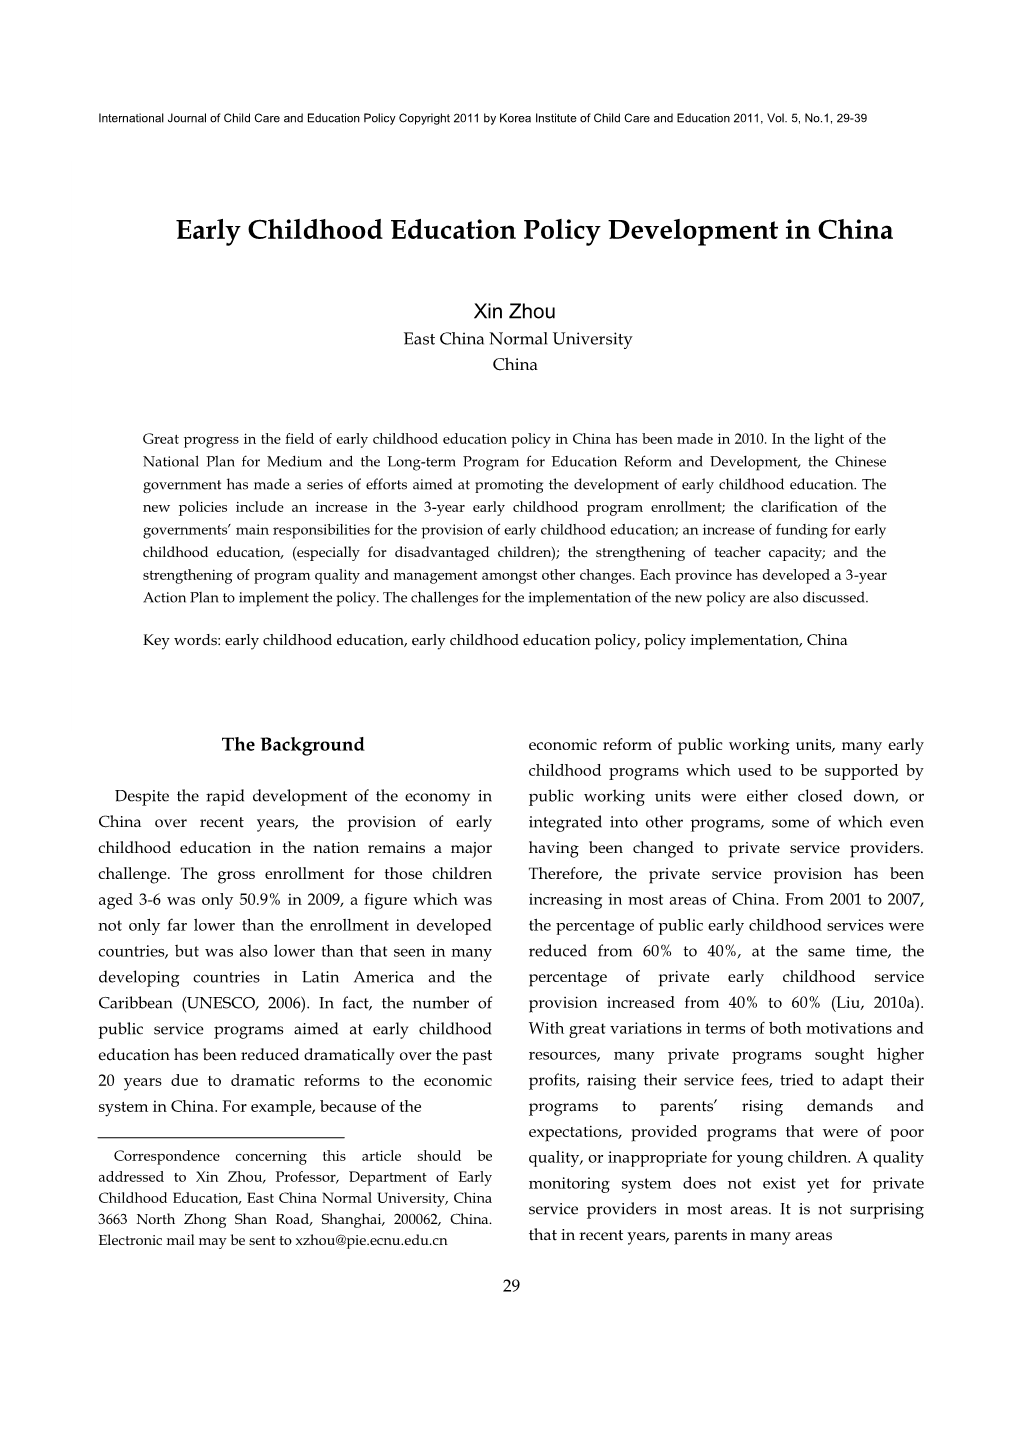 Early Childhood Education Policy Development in China